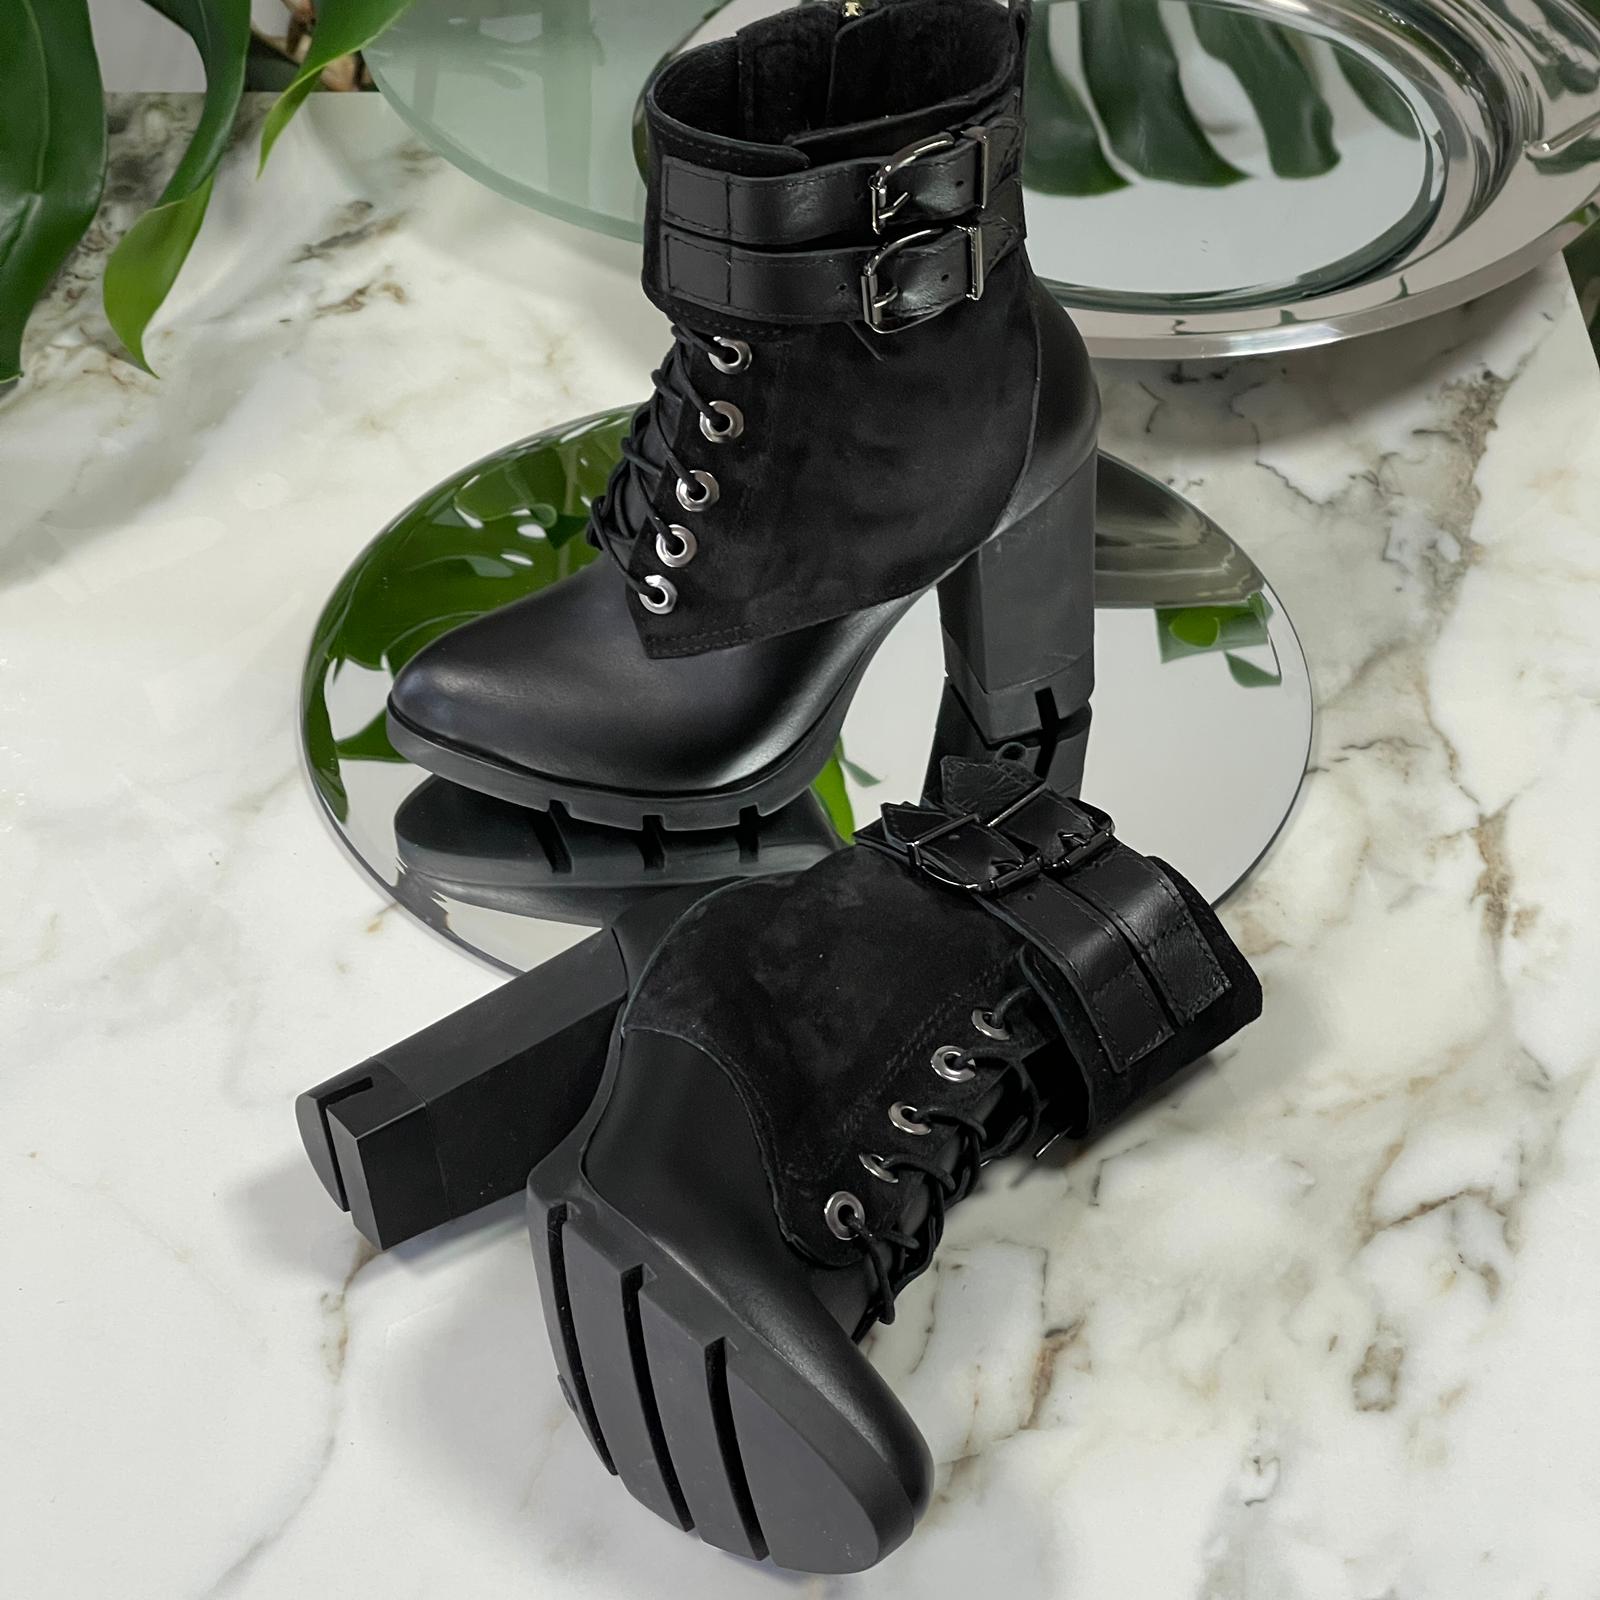 Black leather and suede high heel army boots